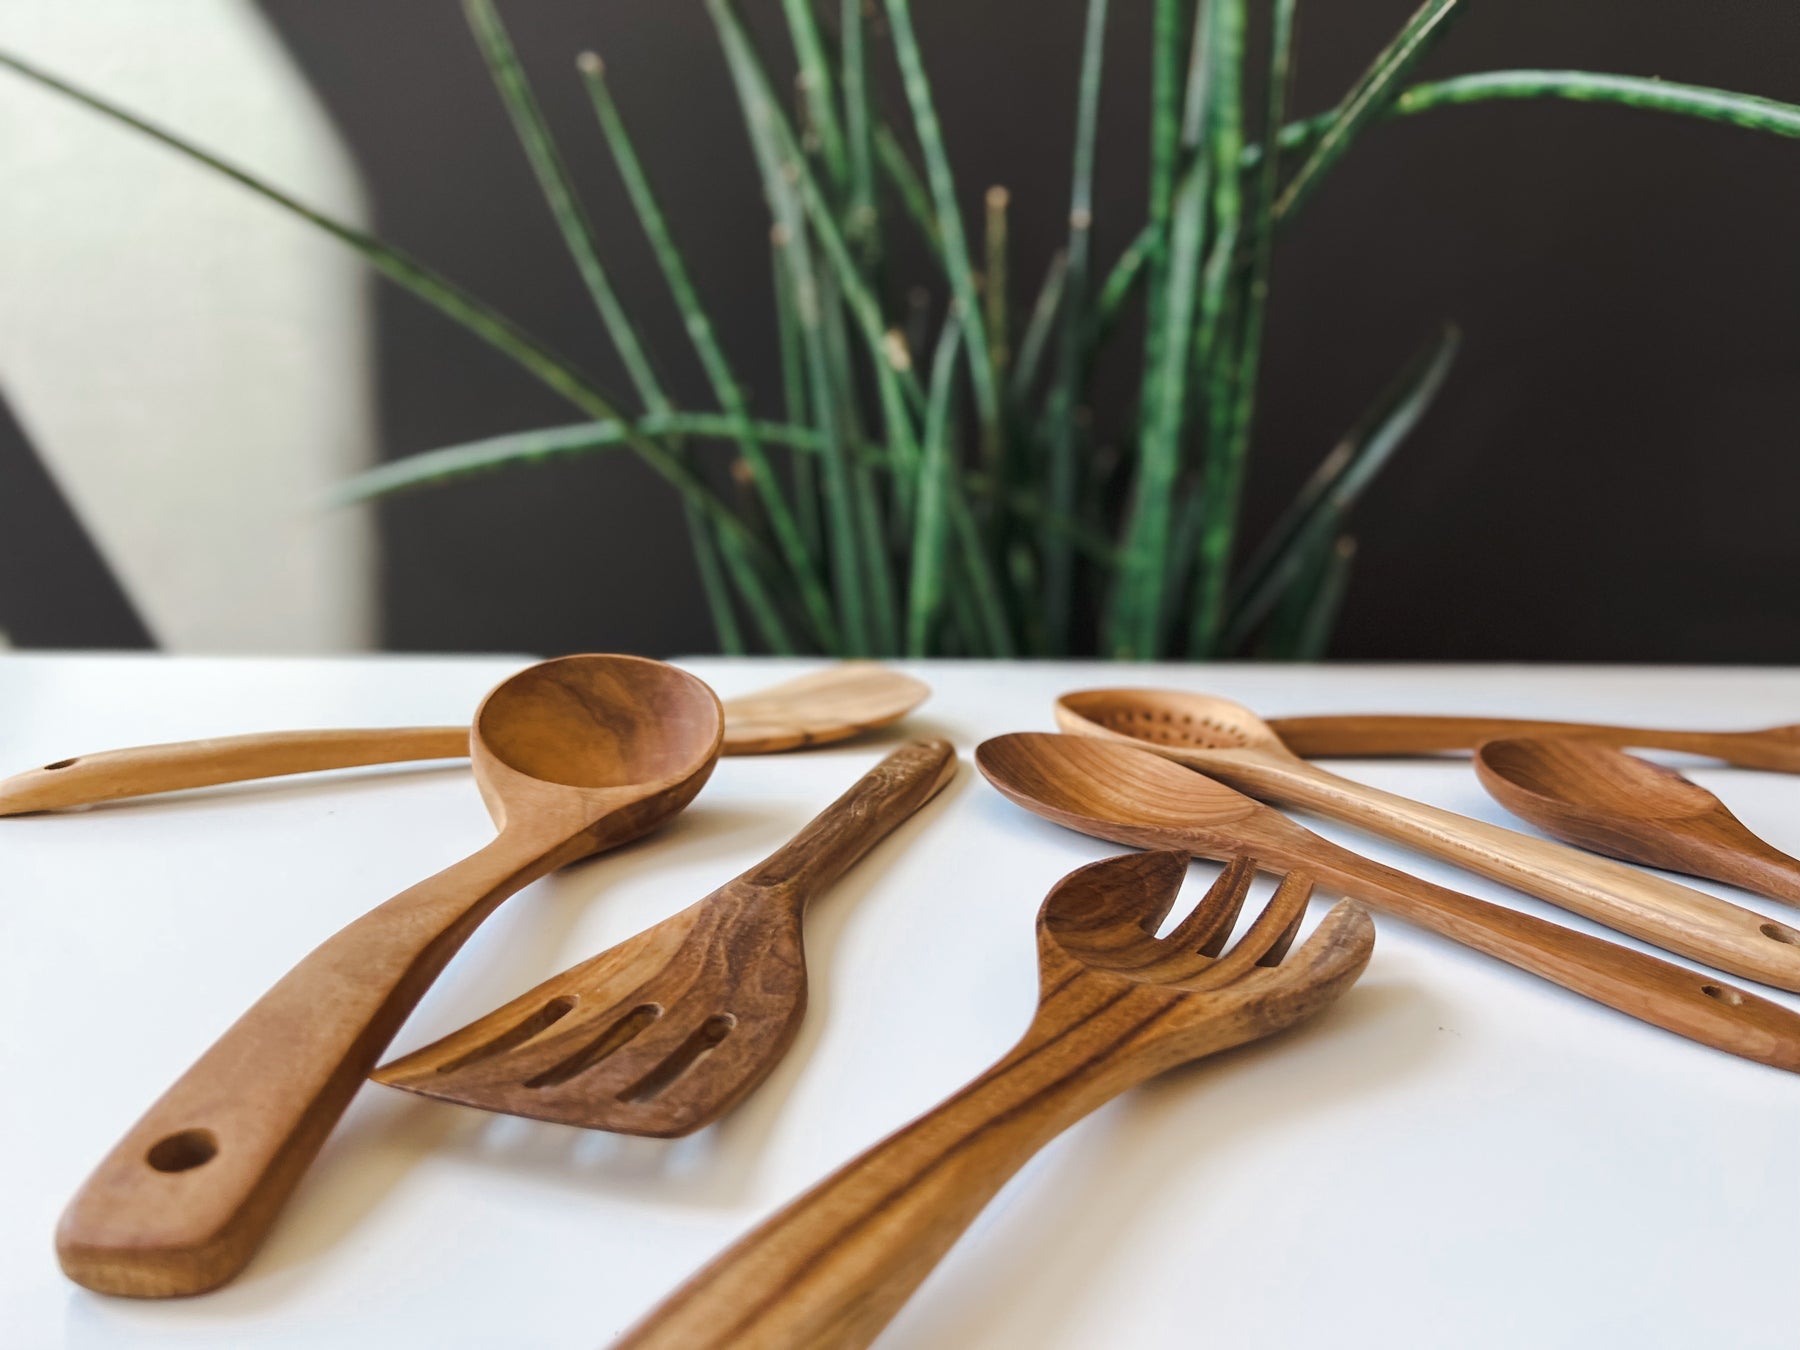 Teak Wood Kitchen Utensils: The Best Gift for Women Who Have Everything